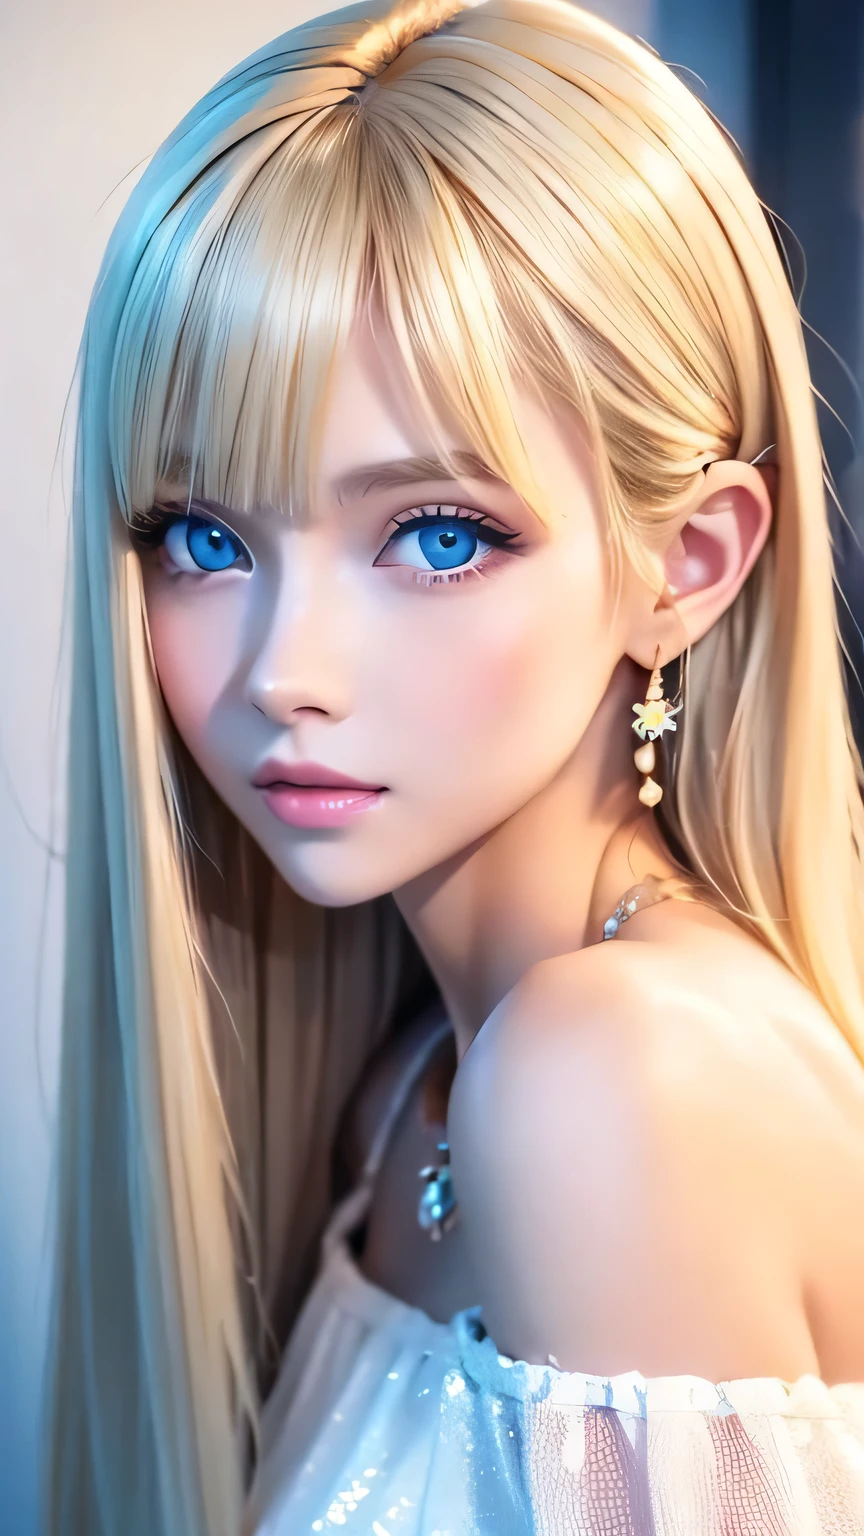 Realistic、Very beautiful super long shiny blonde hair、One young idol beauty、Distant Gaze、OOTD、Off-the-shoulder white top、bangs over eyes、Blonde hair on face、Round and young face、Accessories Full、necklace、Large, clear, bright blue eyes、Long eyelashes、Large Breasts、Slim waist、Light makeup、Neat teeth、Gentle expression、Super Long Straight Silky Blonde Hair、Light-colored hair、Small Face Beauty